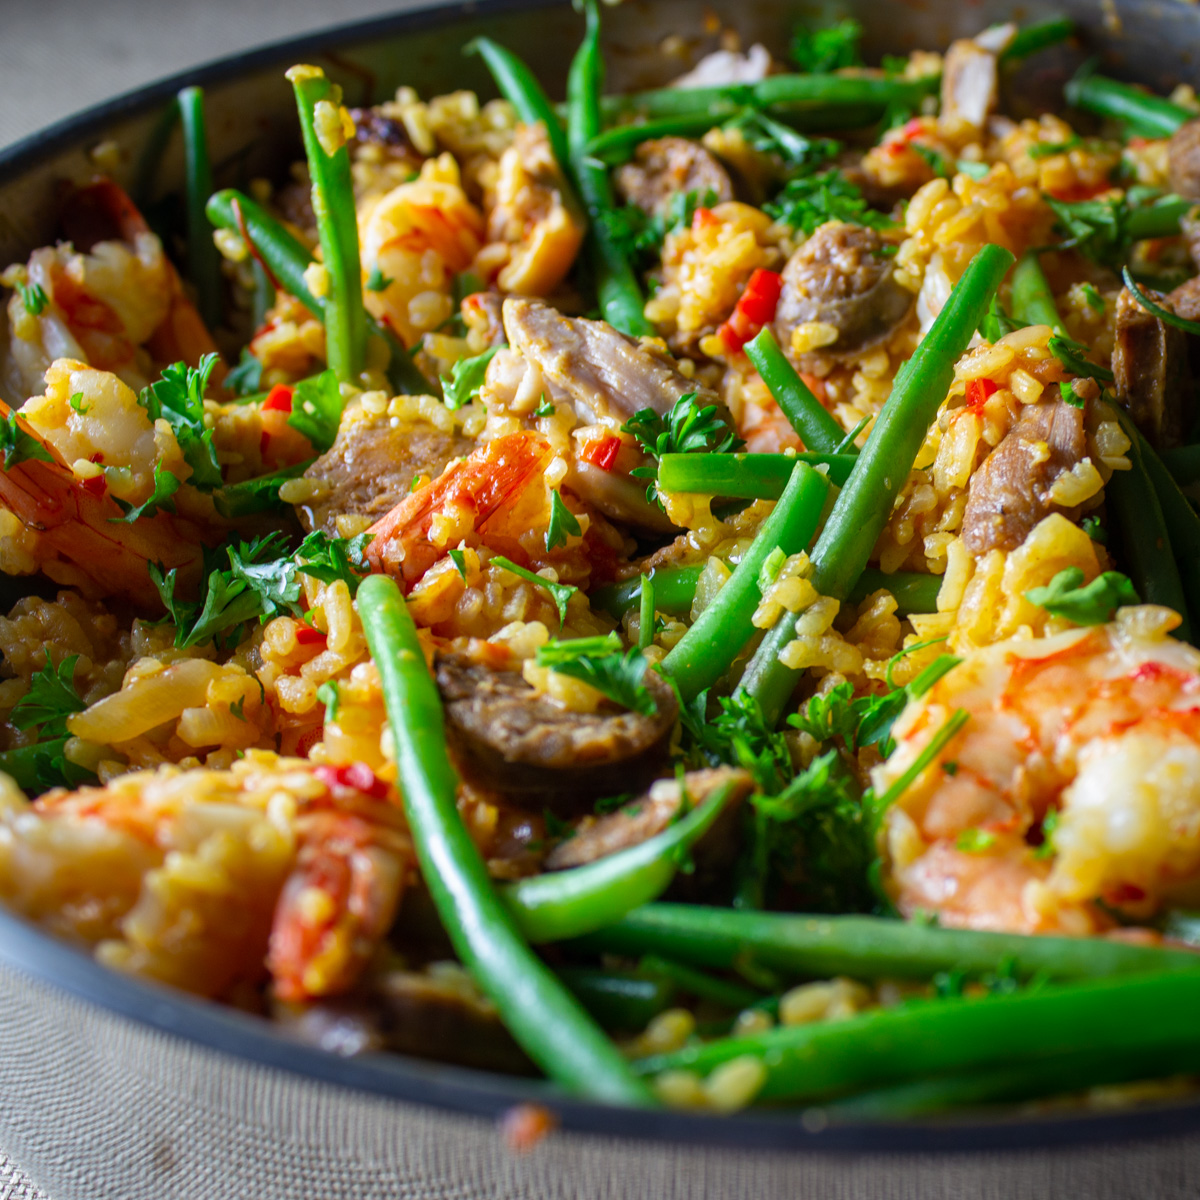 How To Make Paella (Step by Step)